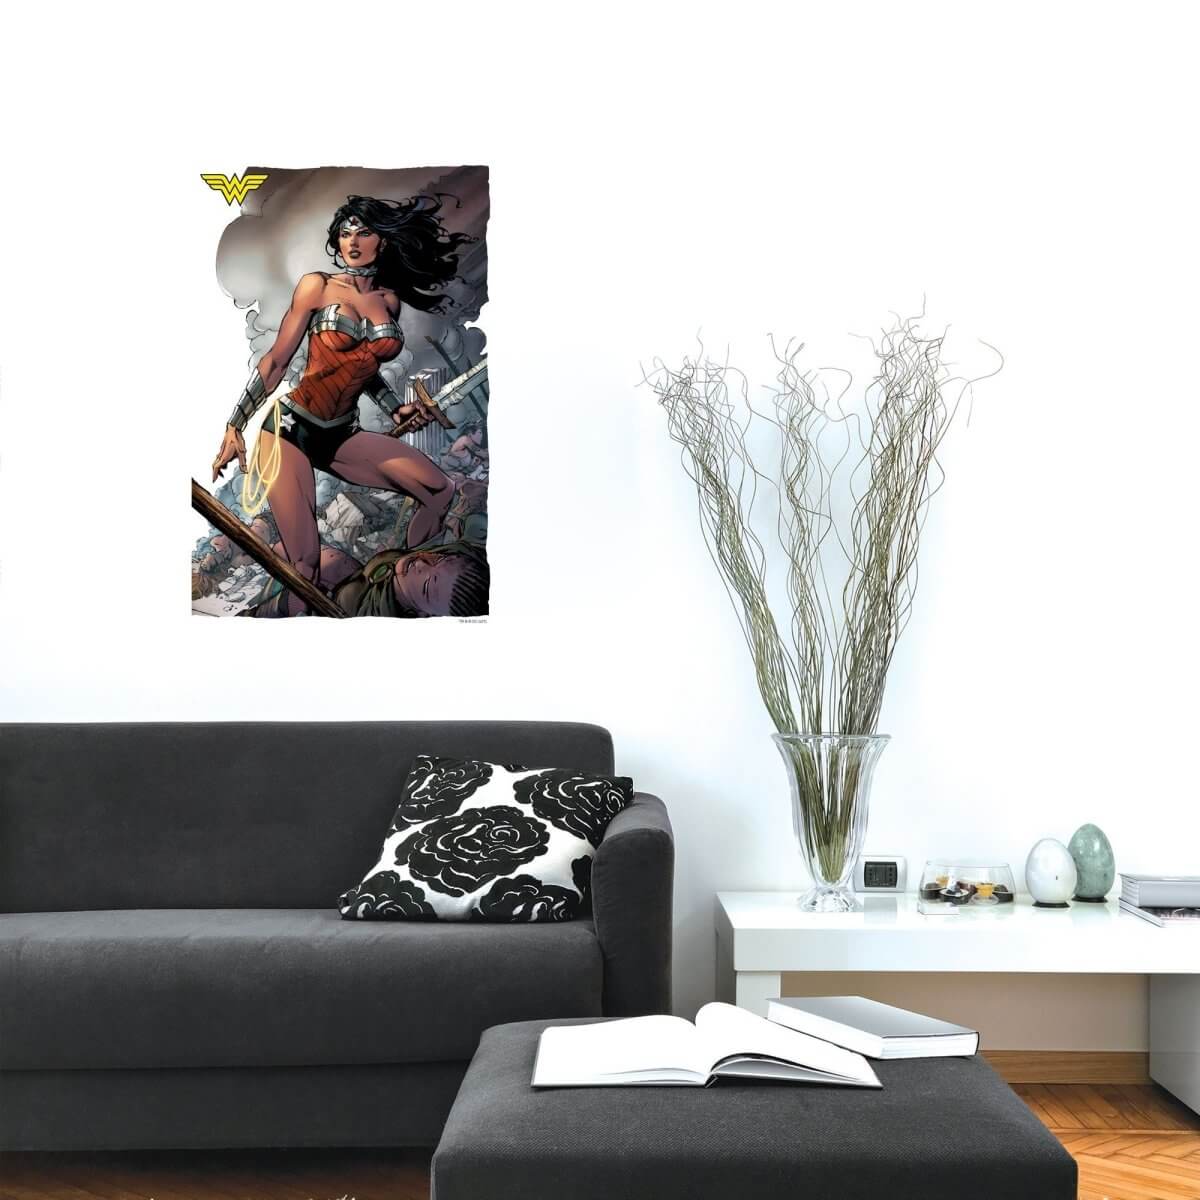 Kismet Decals Wonder Woman #38 Pg 17 Comic Cover Series Officially Licensed Wall Sticker - Easy DIY DC Comics Home, Kids or Adult Bedroom, Office, Living Room Decor Wall Art - Kismet Decals